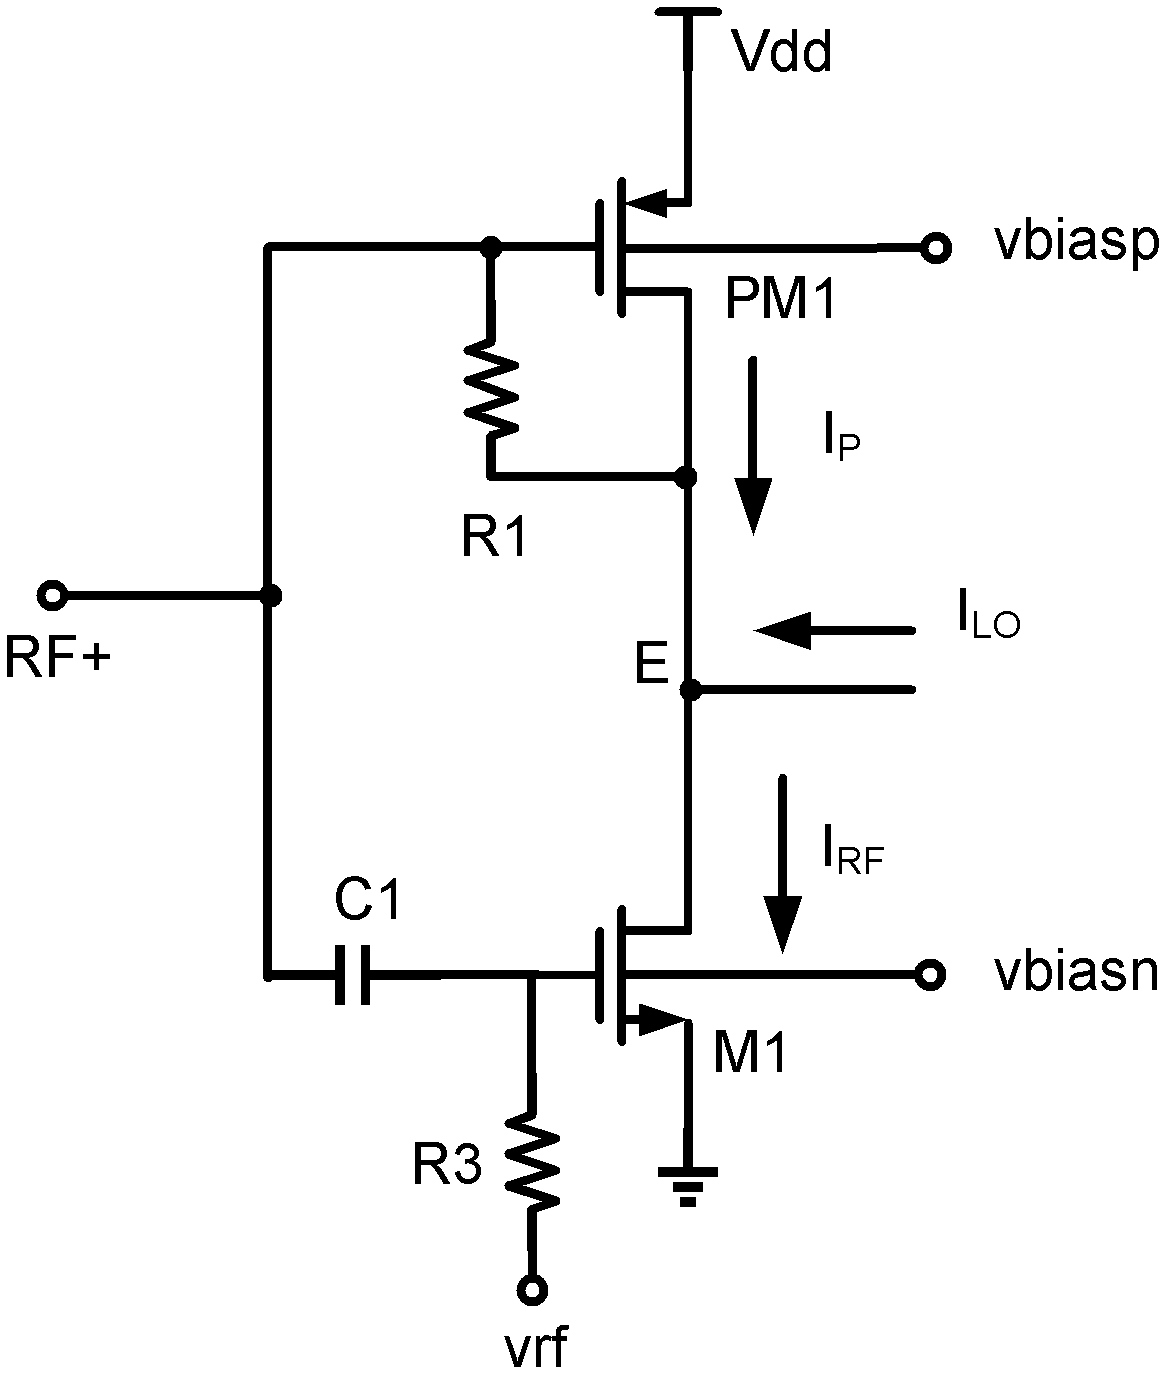 Ultralow consumption current multiplexing mixer based on substrate bias